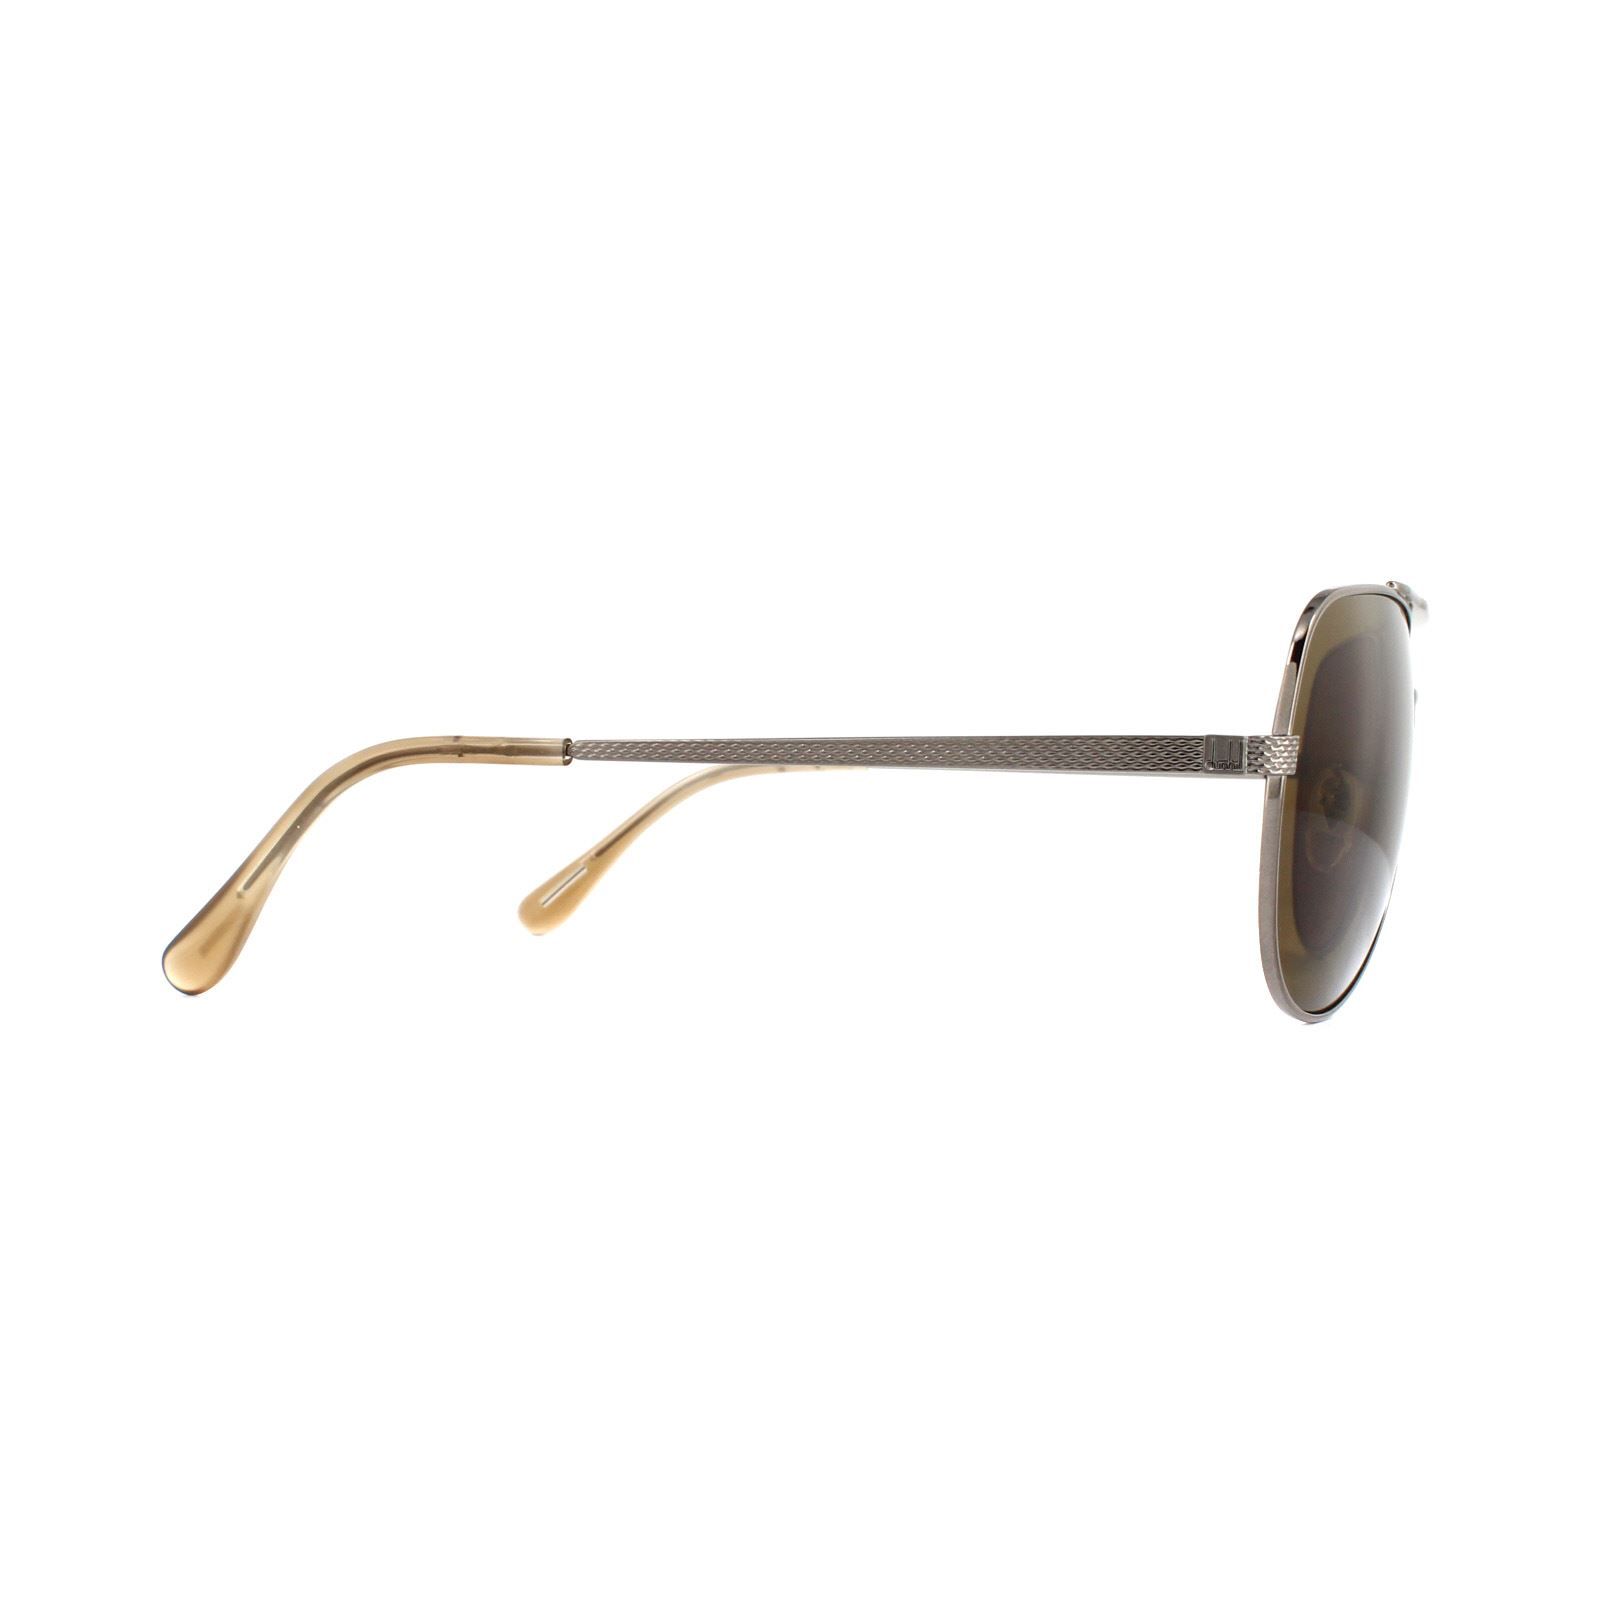 Dunhill Sunglasses SDH007 509P Shiny Gunmetal Brown Polarized are a classic aviator style with textured patterned arms and matching top brow bar for a stylish unique finish.